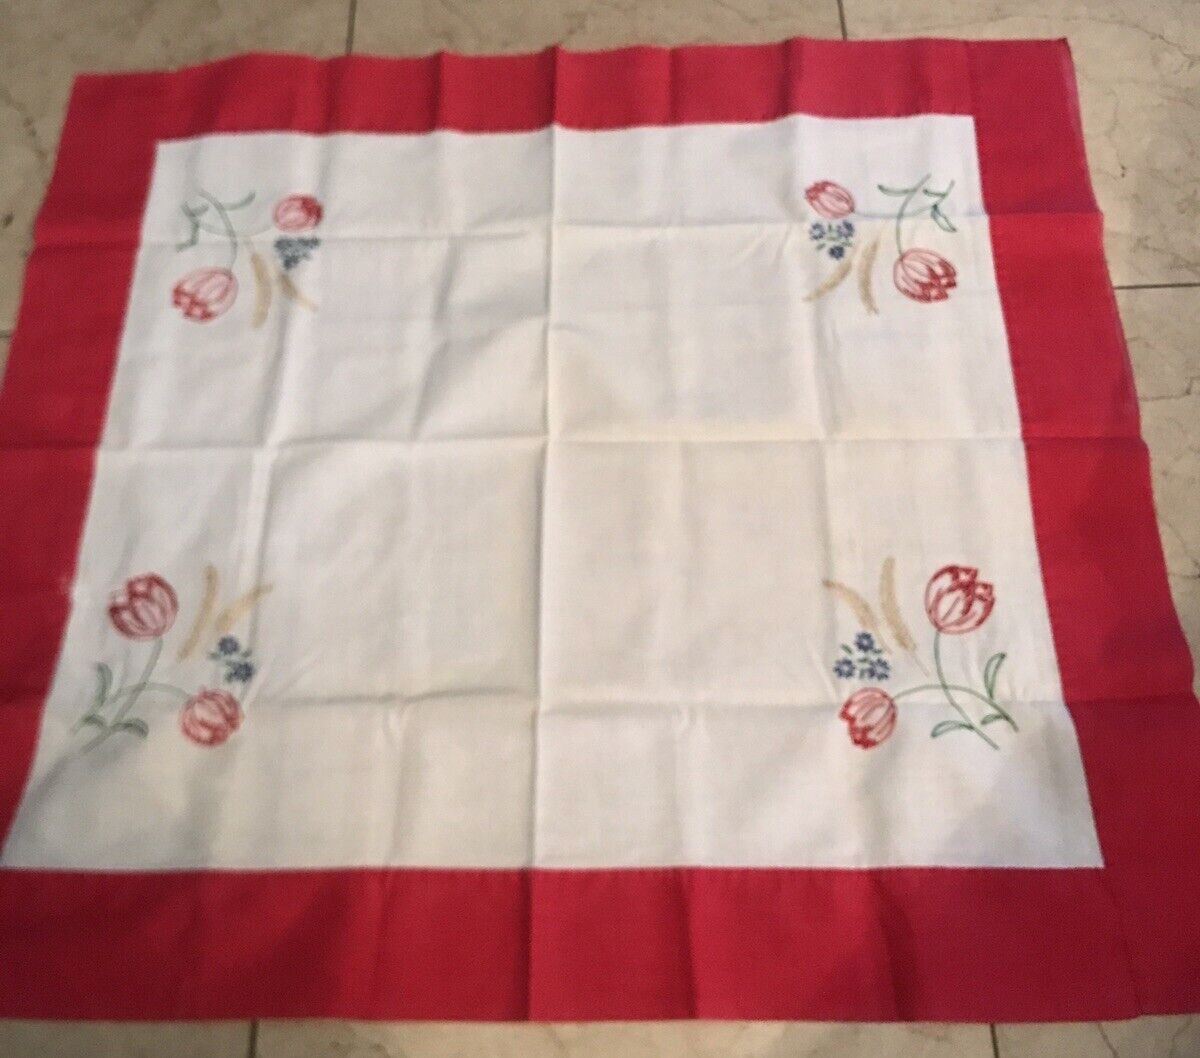 Vintage Hand Embroidered Tablecloth Floral Red White 37”x32” Cottage Core Estate